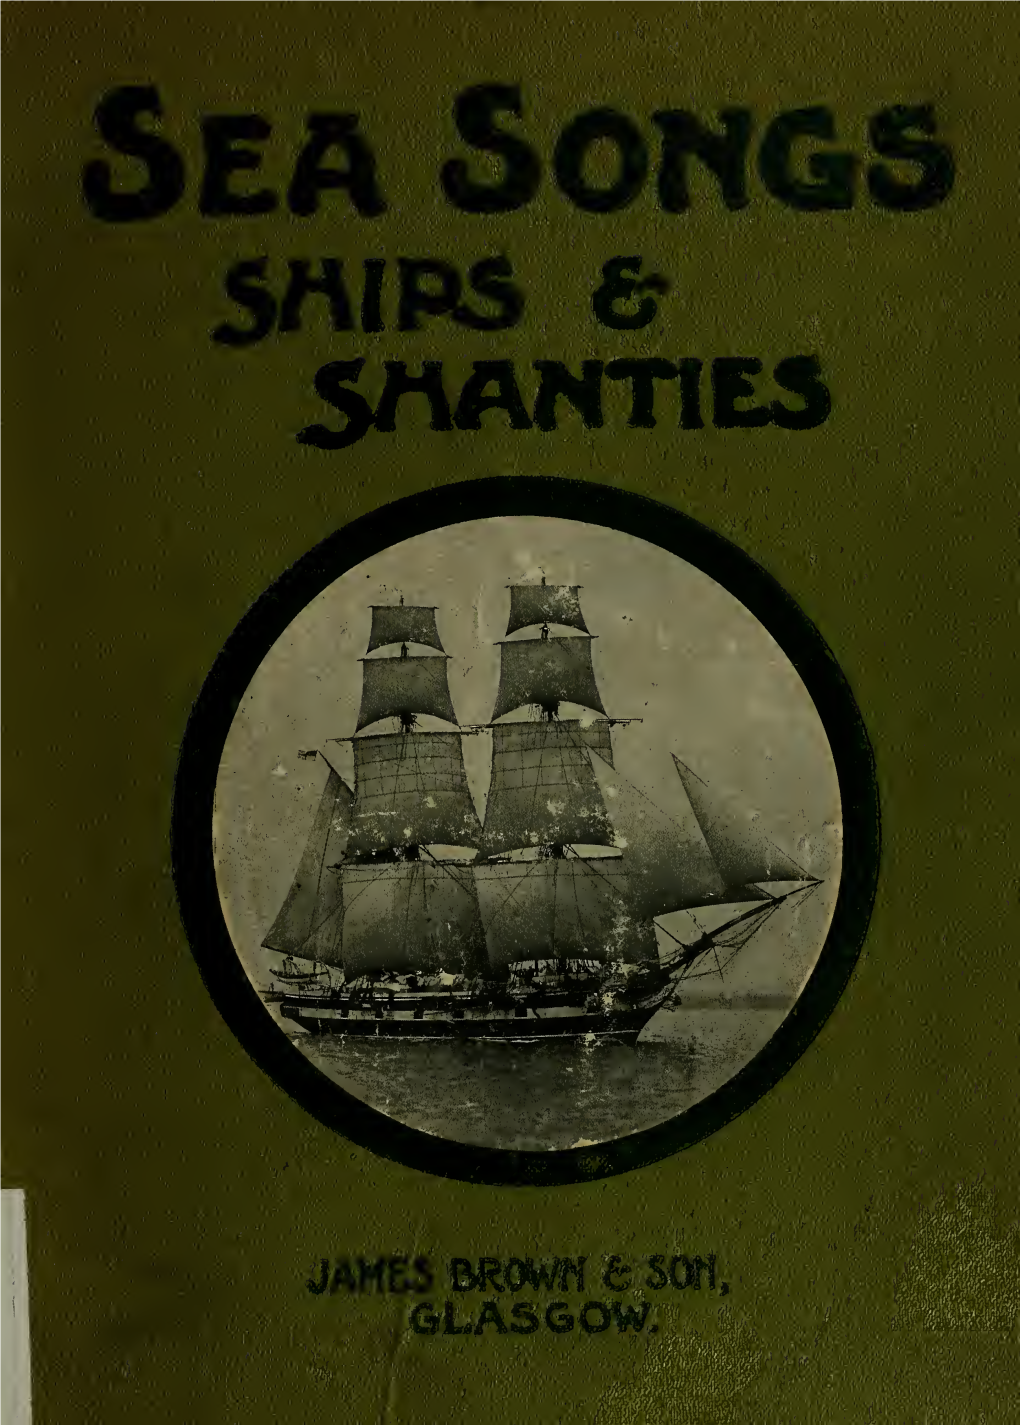 SHIPS, SEA SONGS and SHANTIES by the Same Author— SHAKESPEARE's SEA TERMS EXPLAINED